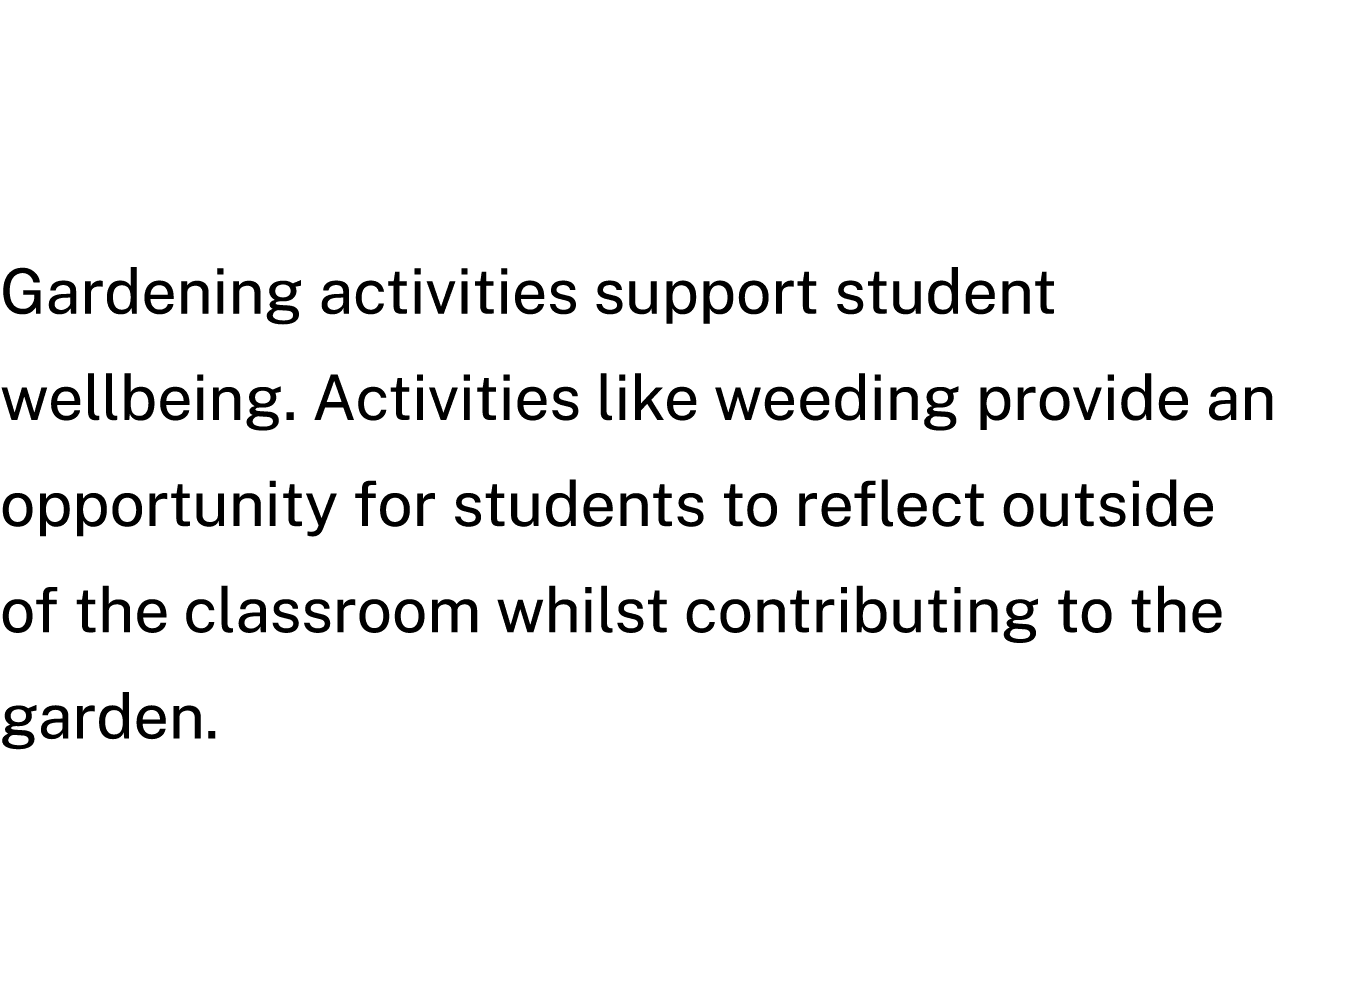 Gardening activities support student wellbeing. Activities like weeding provide an opportunity for students to reflec...